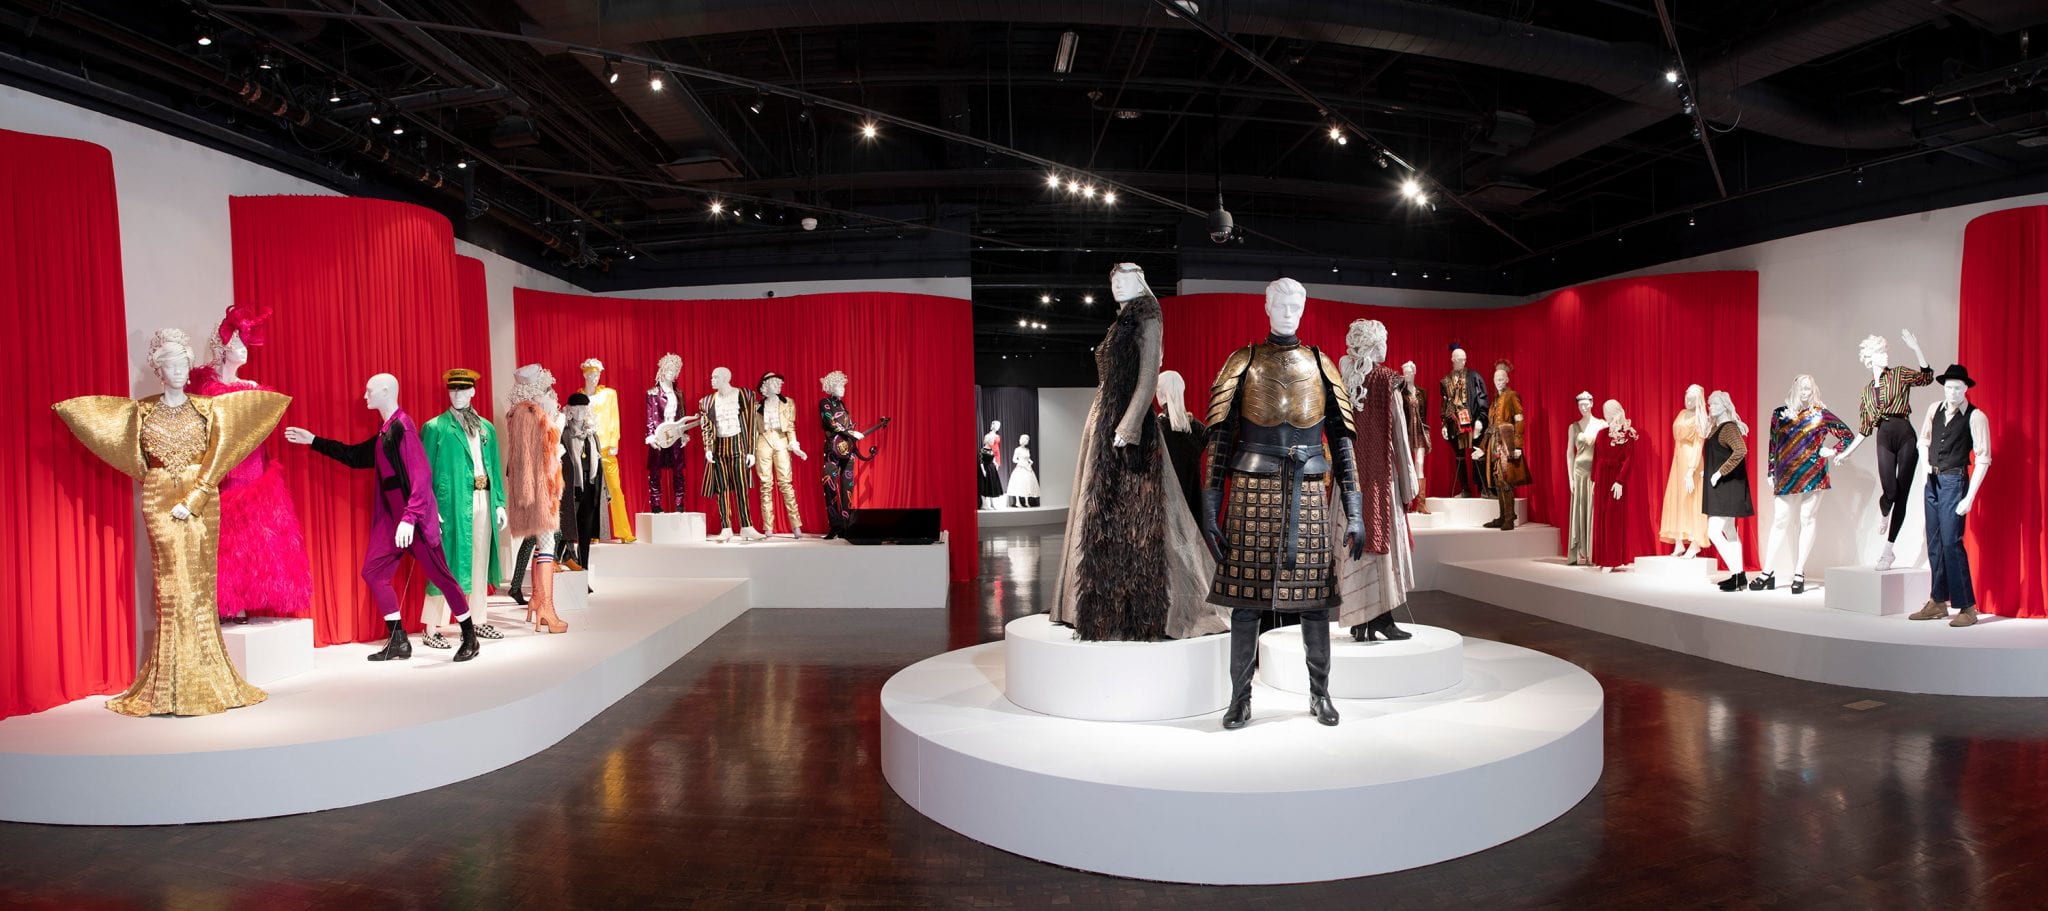 Must See Now: Fidm’s Art Of Television Costume Design